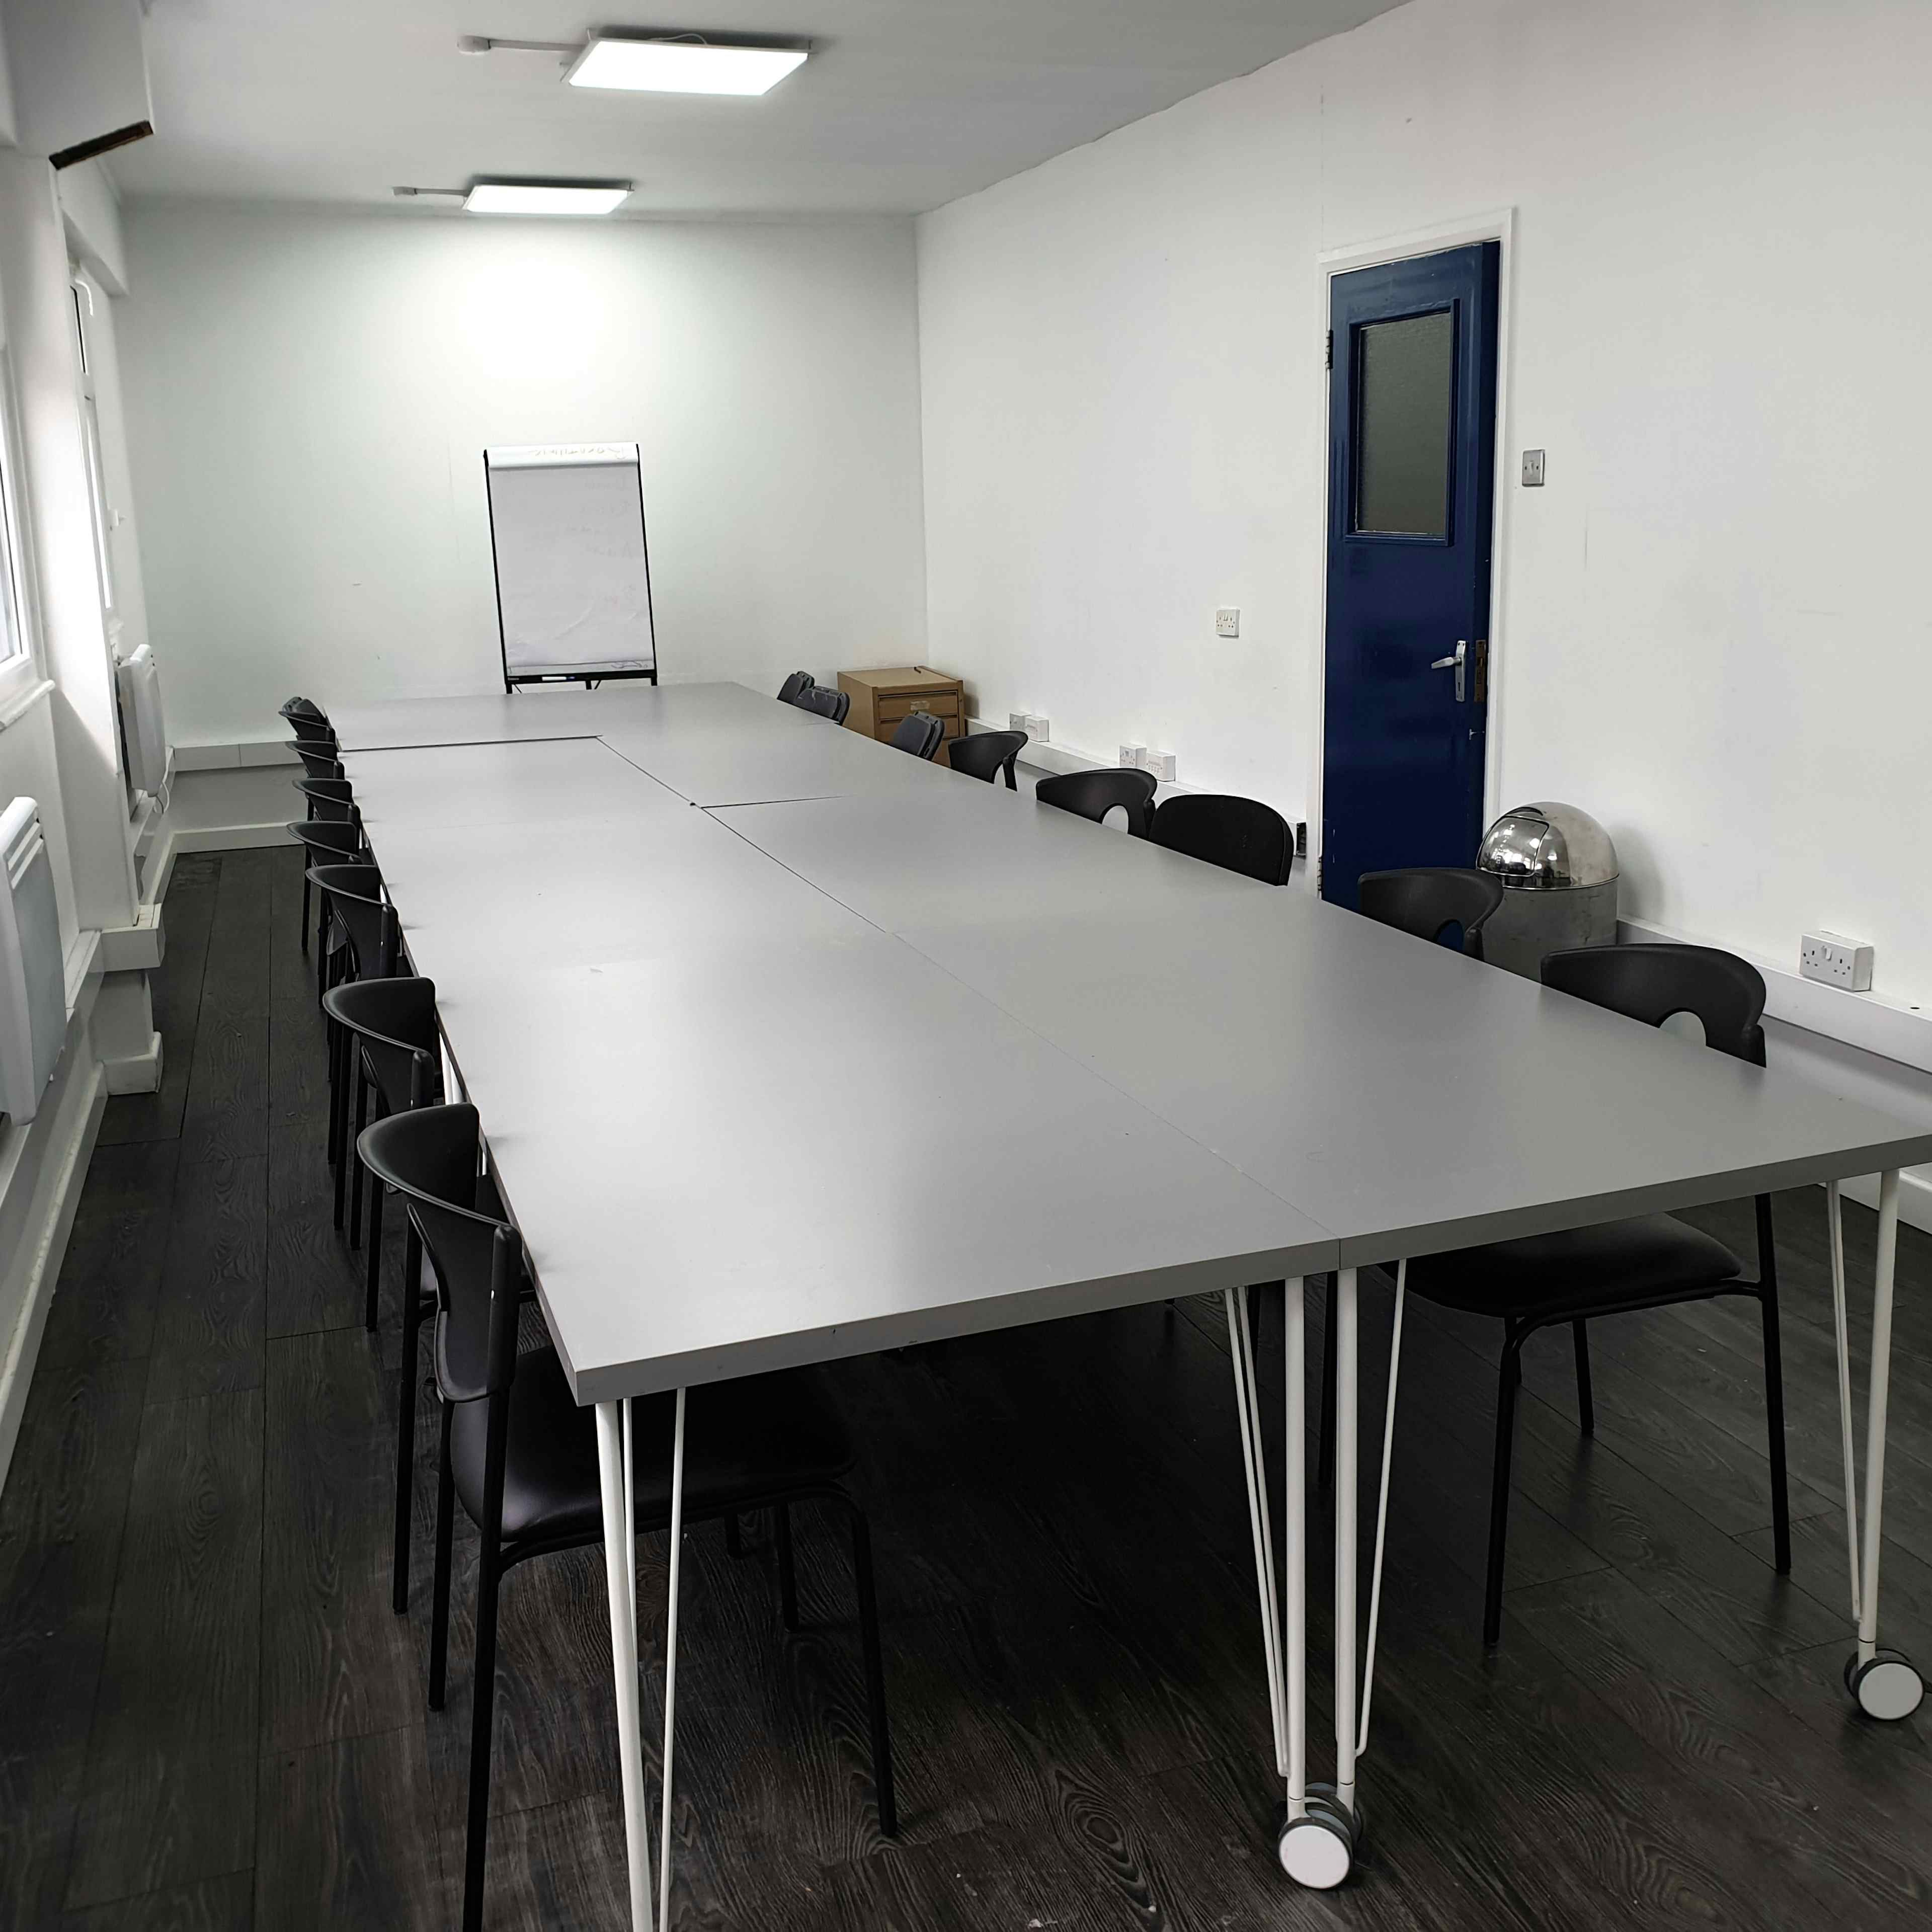 Colombo Sports & Community Centre - Office/Training Room 2 image 2